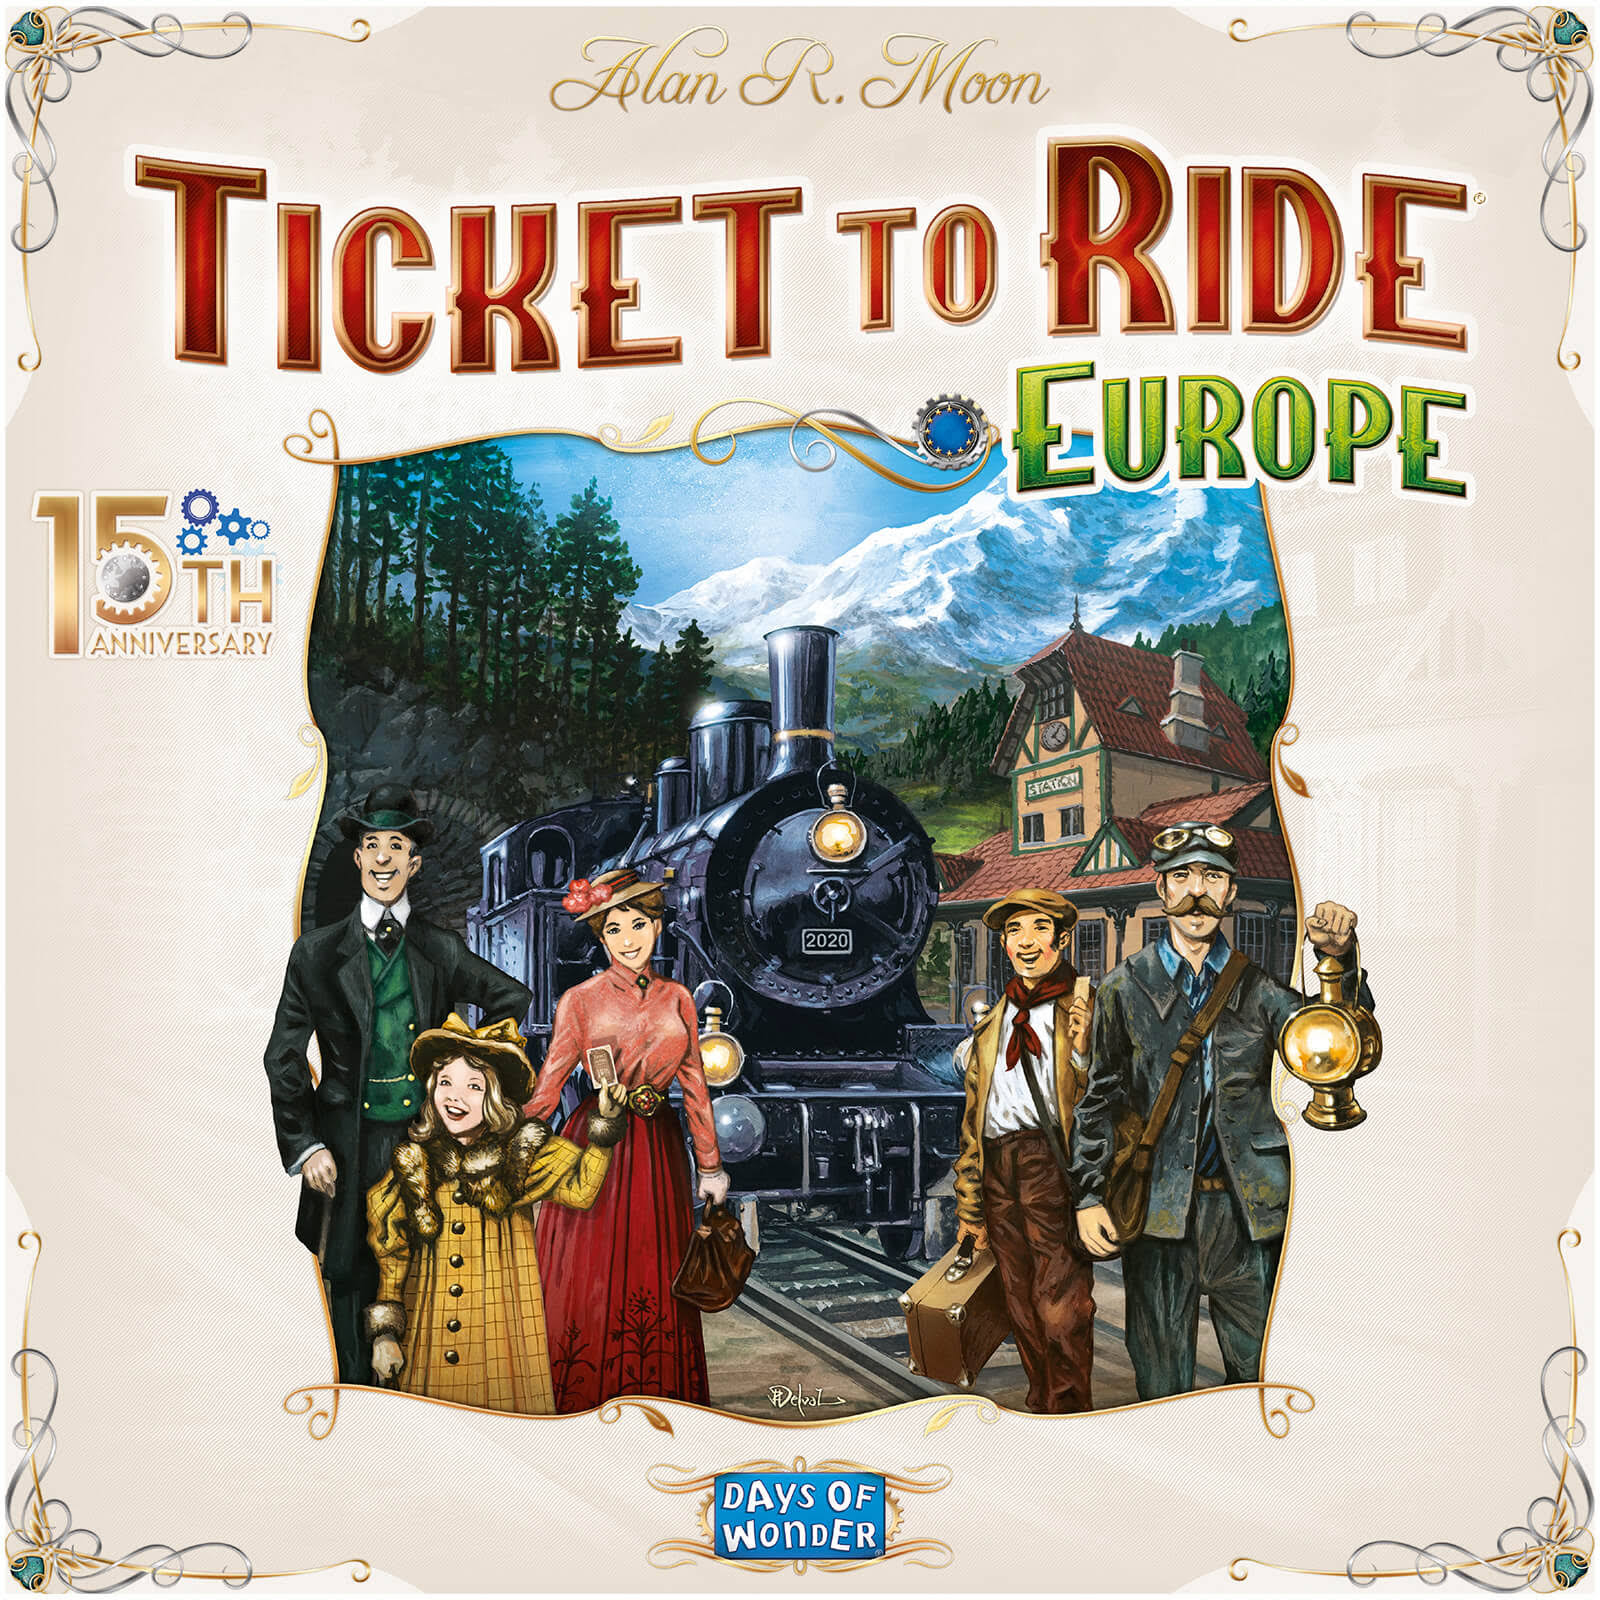 Ticket To Ride Europe 15th Anniversary Edition